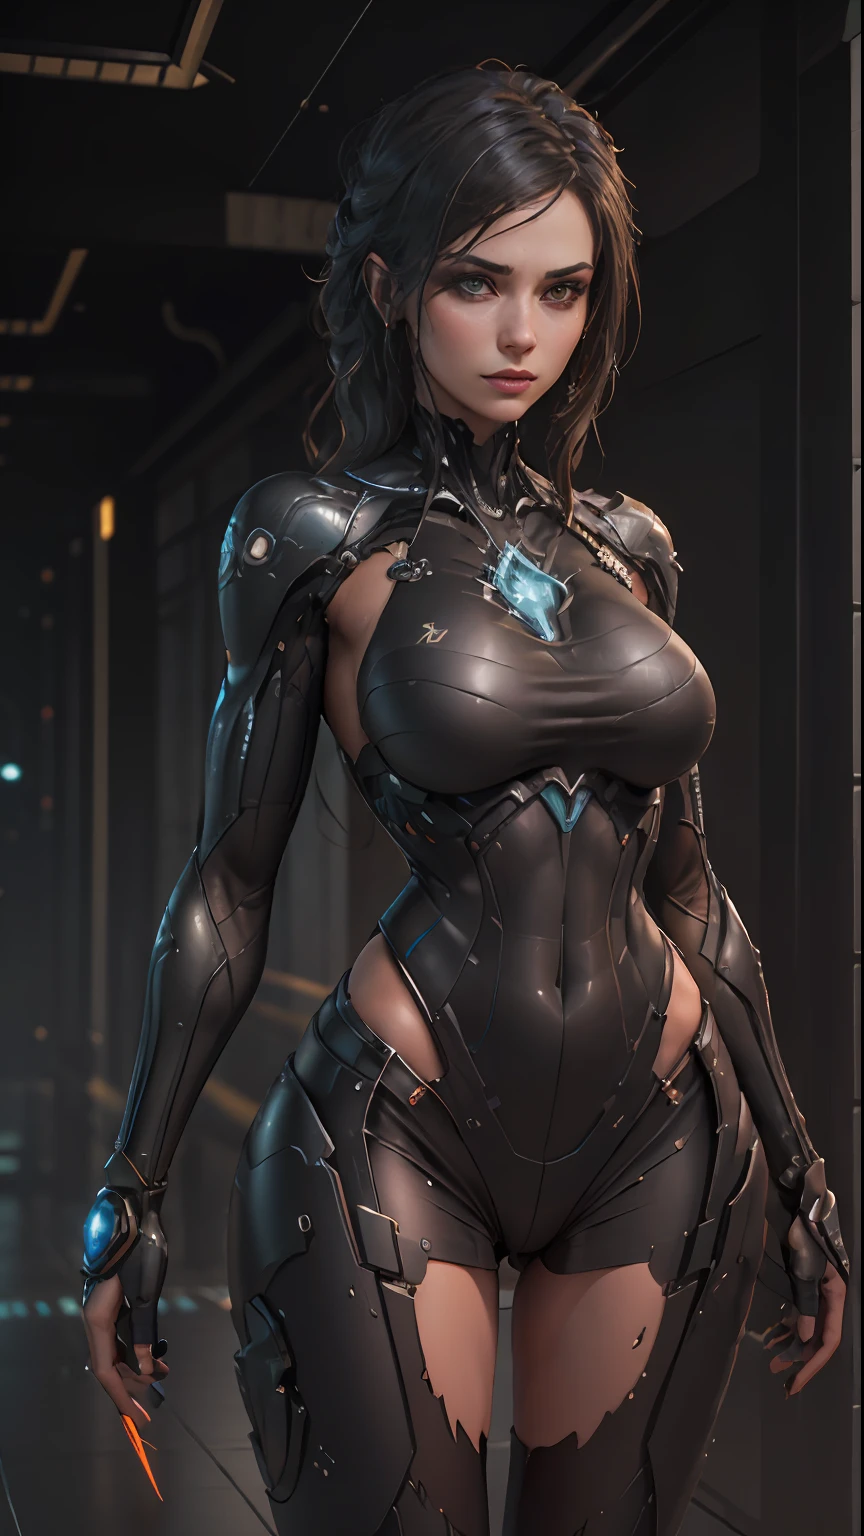 （（best qualtiy））， （（tmasterpiece））， （A detailed：1.4）， 3D， Beautiful images of cyberpunk women， HDR（HighDynamicRange），Ray traching，NVIDIA RTX，Hyper-Resolution，Unreal 5，sub surface scattering，PBR textures，Post-processing，Anisotropic filtering，depth of fields，Maximum clarity and sharpnesany-Layer Textures，Albedo e mapas Speculares，Surface Coloring，Accurate simulation of light-material interactions，perfectly proportions，rendering by octane，twotonelighting，Wide aperture，Low ISO，White balance，trichotomy，8K RAW，Frozen transparent nano set